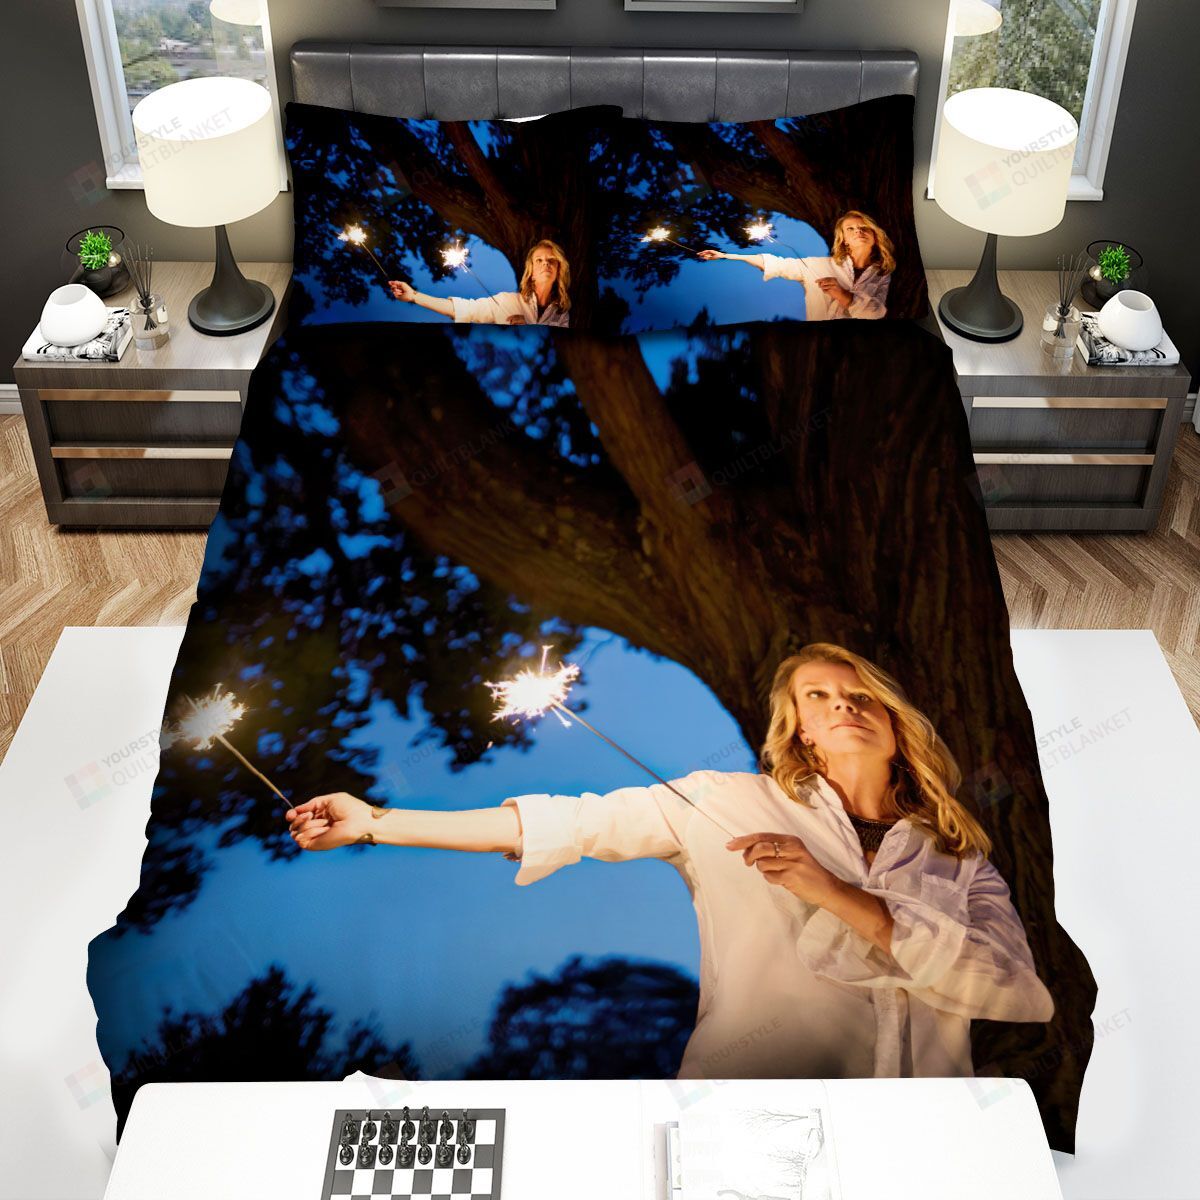 Mary Chapin Carpenter Posting Of The Girl Under The Tree Bed Sheets Spread Comforter Duvet Cover Bedding Sets